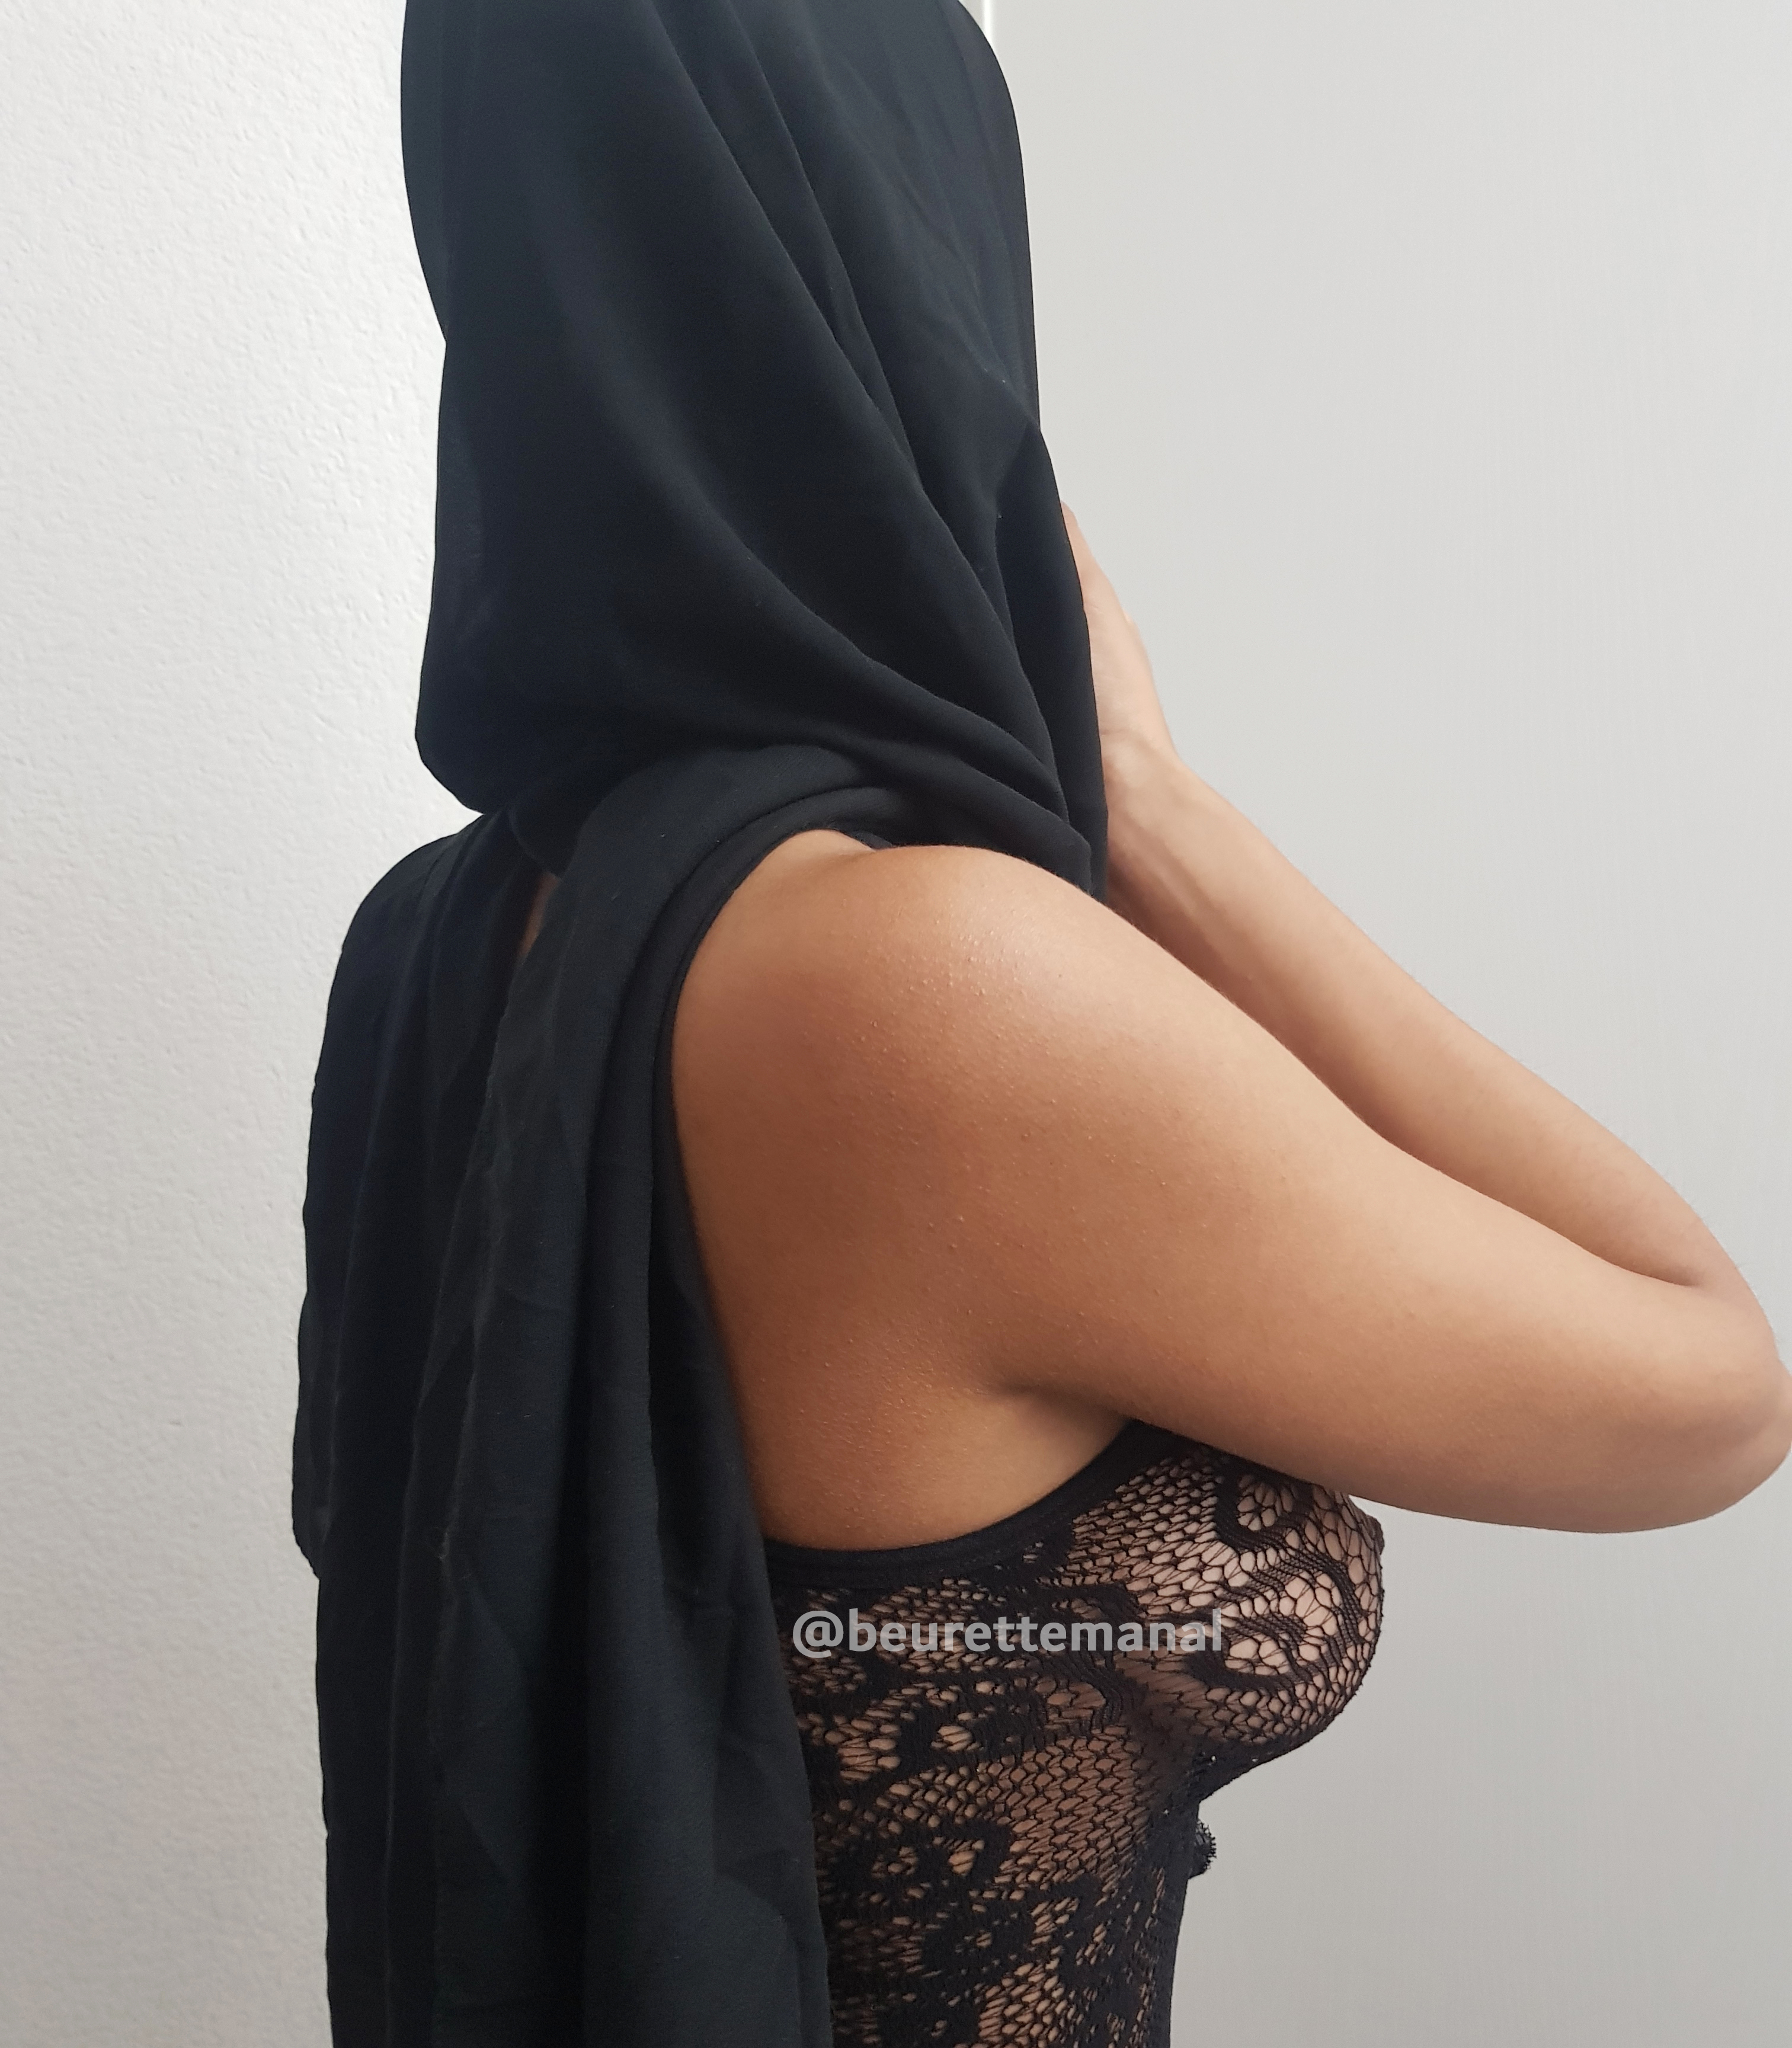 Trying to be a slut hotwife and a good Muslim Hijabi at the same time ?